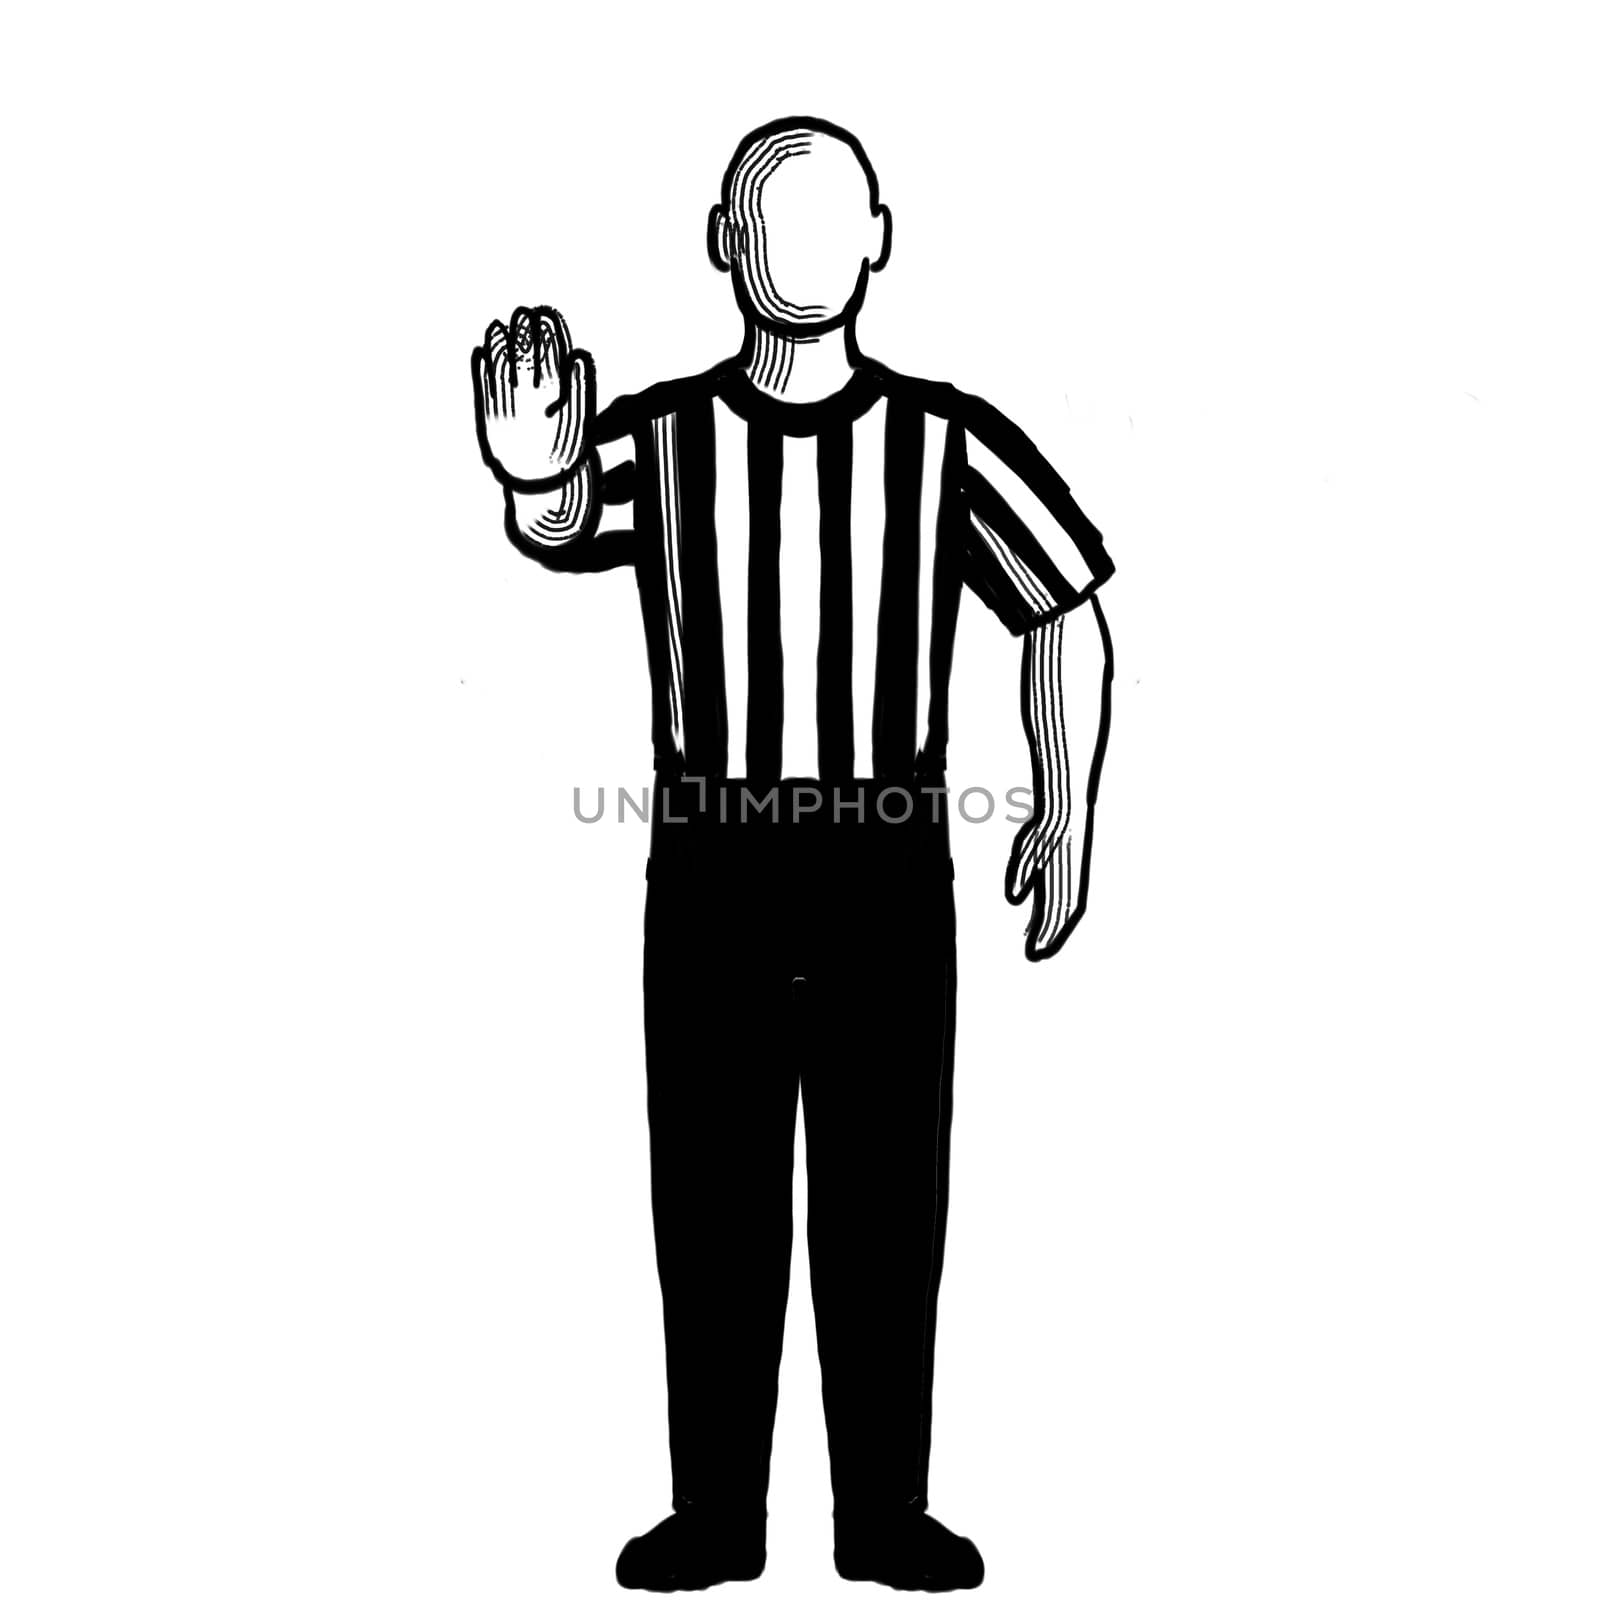 Black and white illustration of a basketball referee or official with hand signal showing directional signal viewed from front on isolated background done retro style.